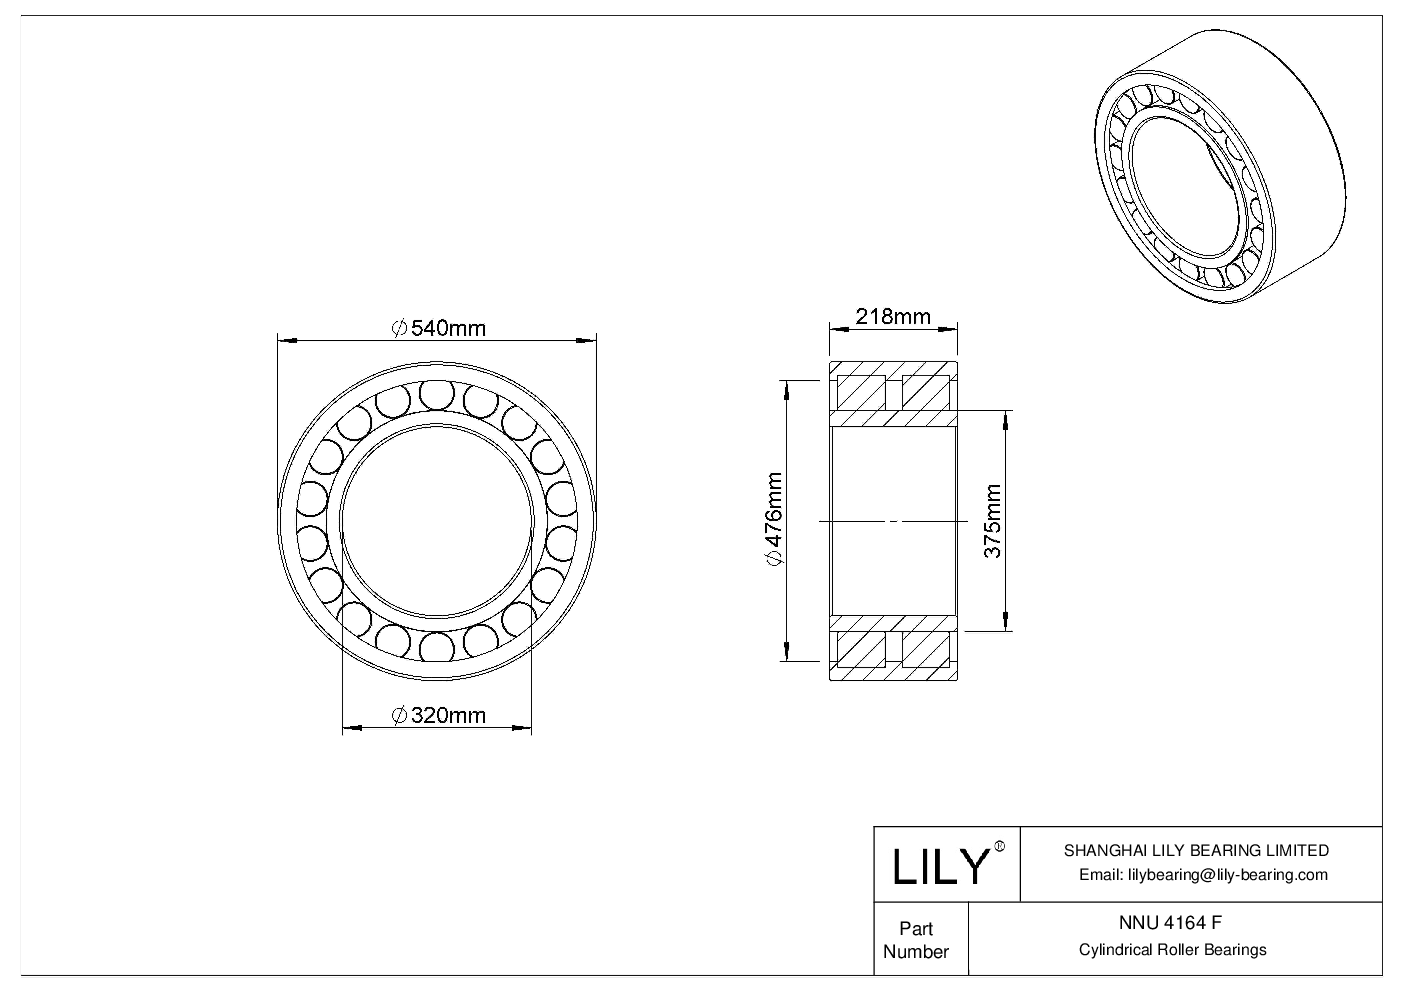 NNU 4164 F Double Row Cylindrical Roller Bearings cad drawing